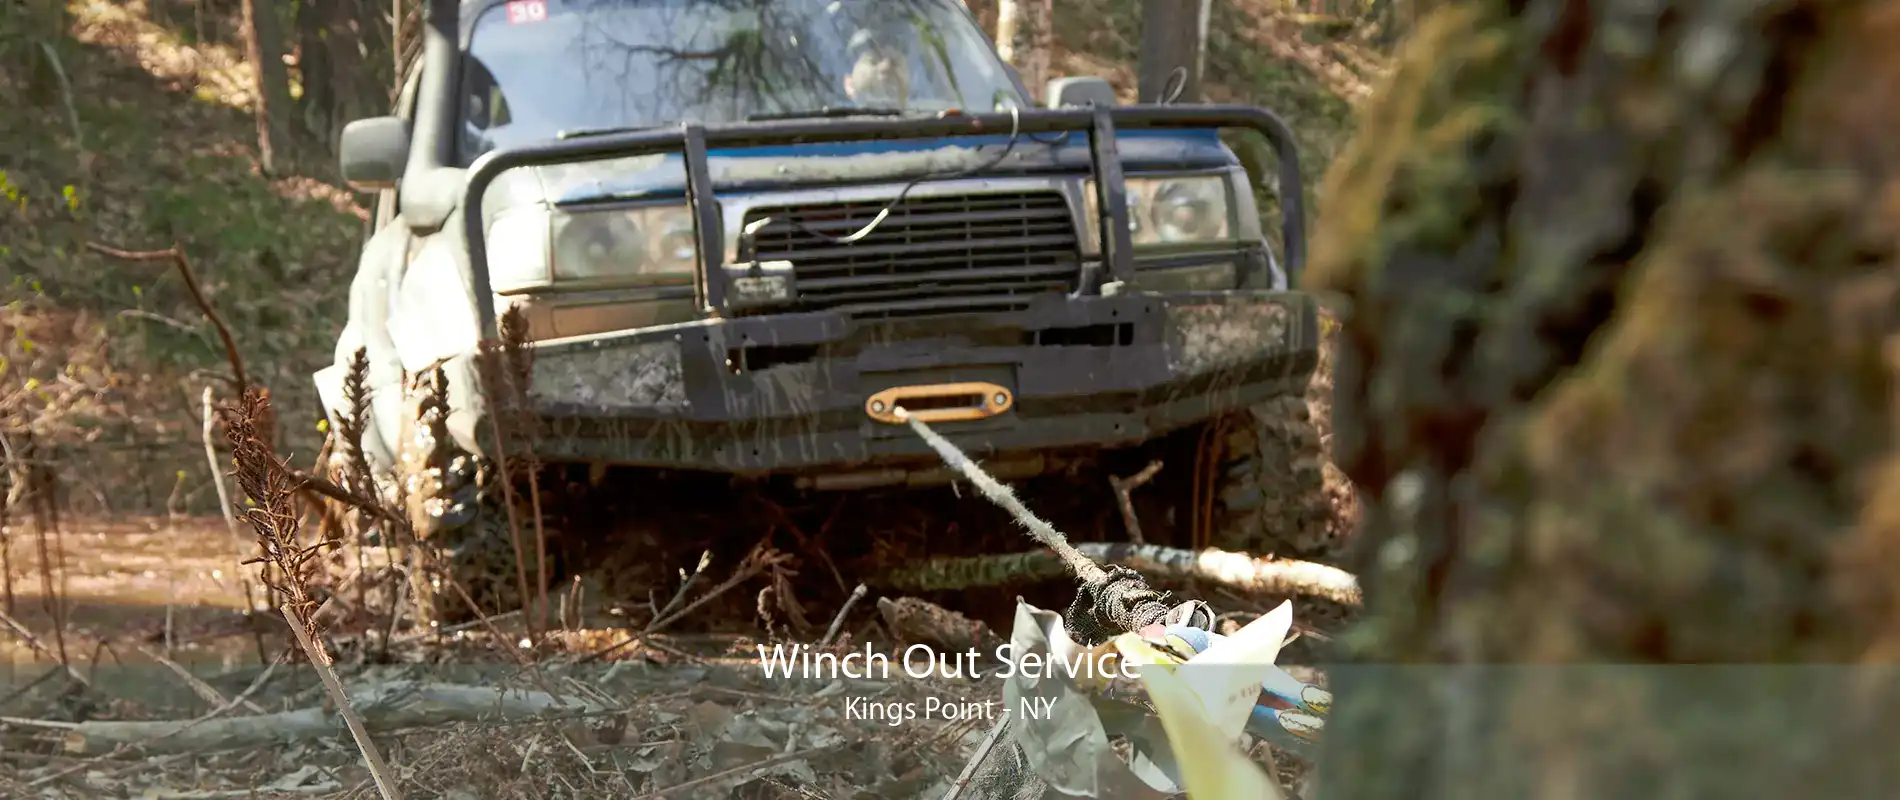 Winch Out Service Kings Point - NY